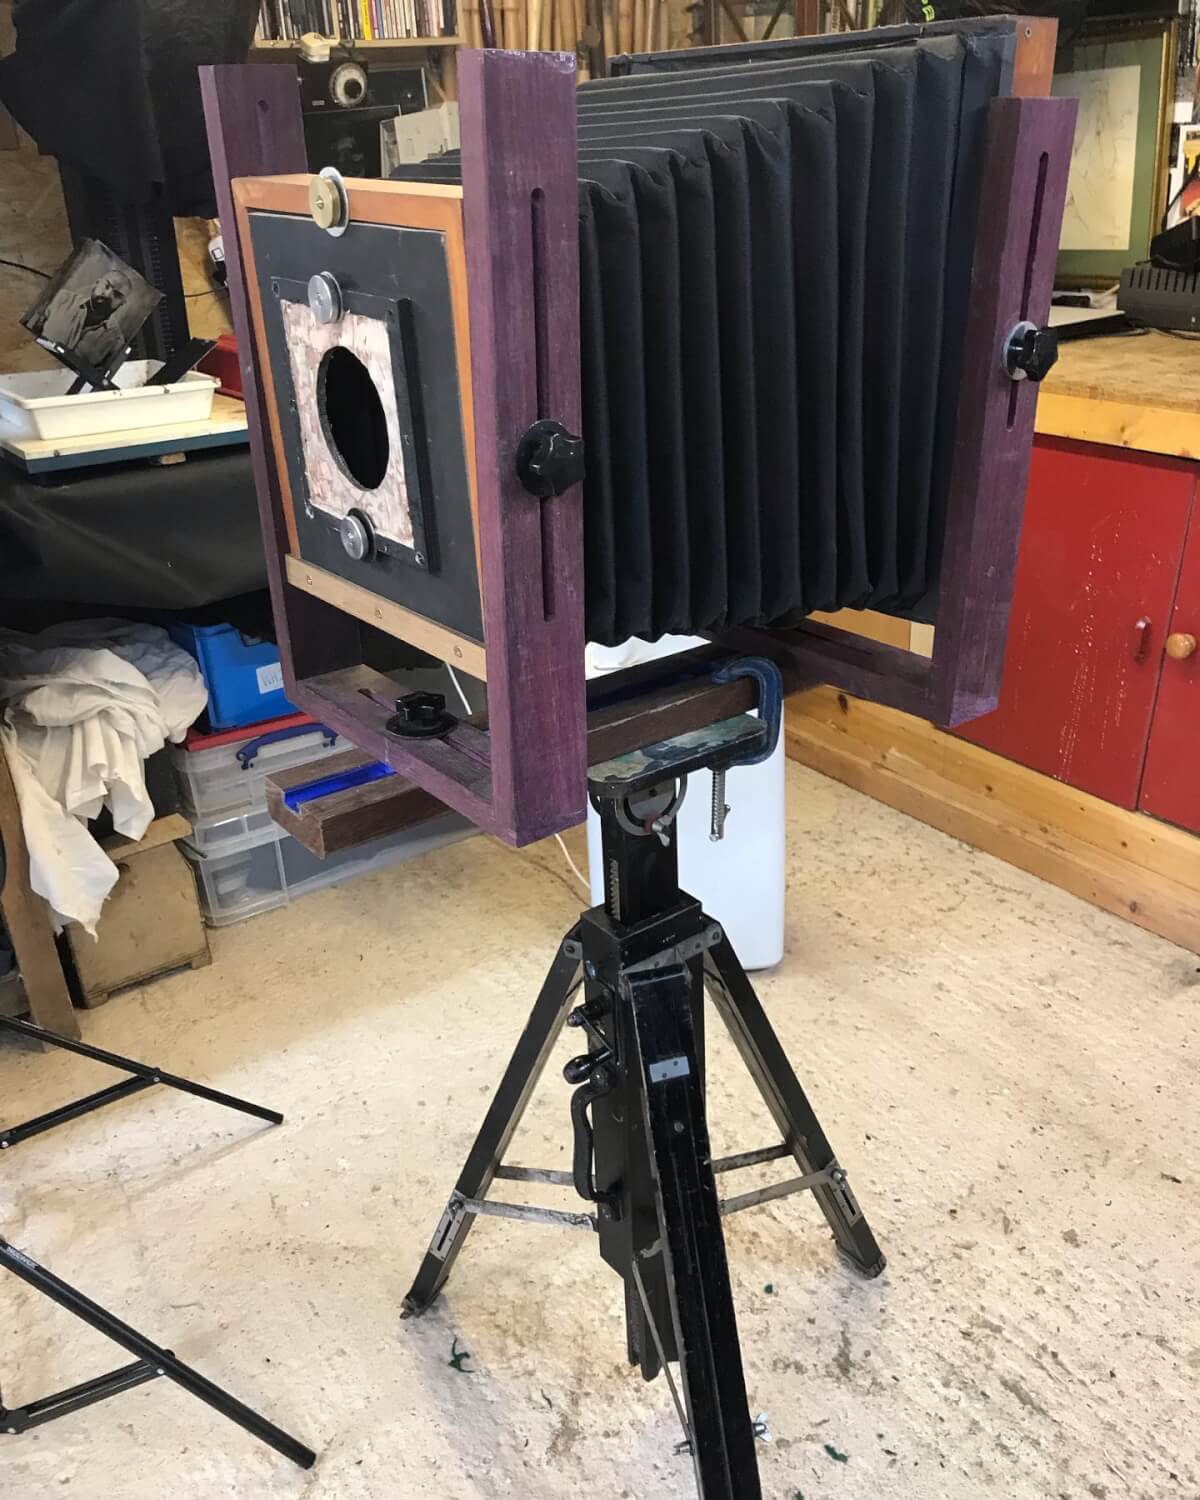 The homemade 8x10 wet place lockdown camera